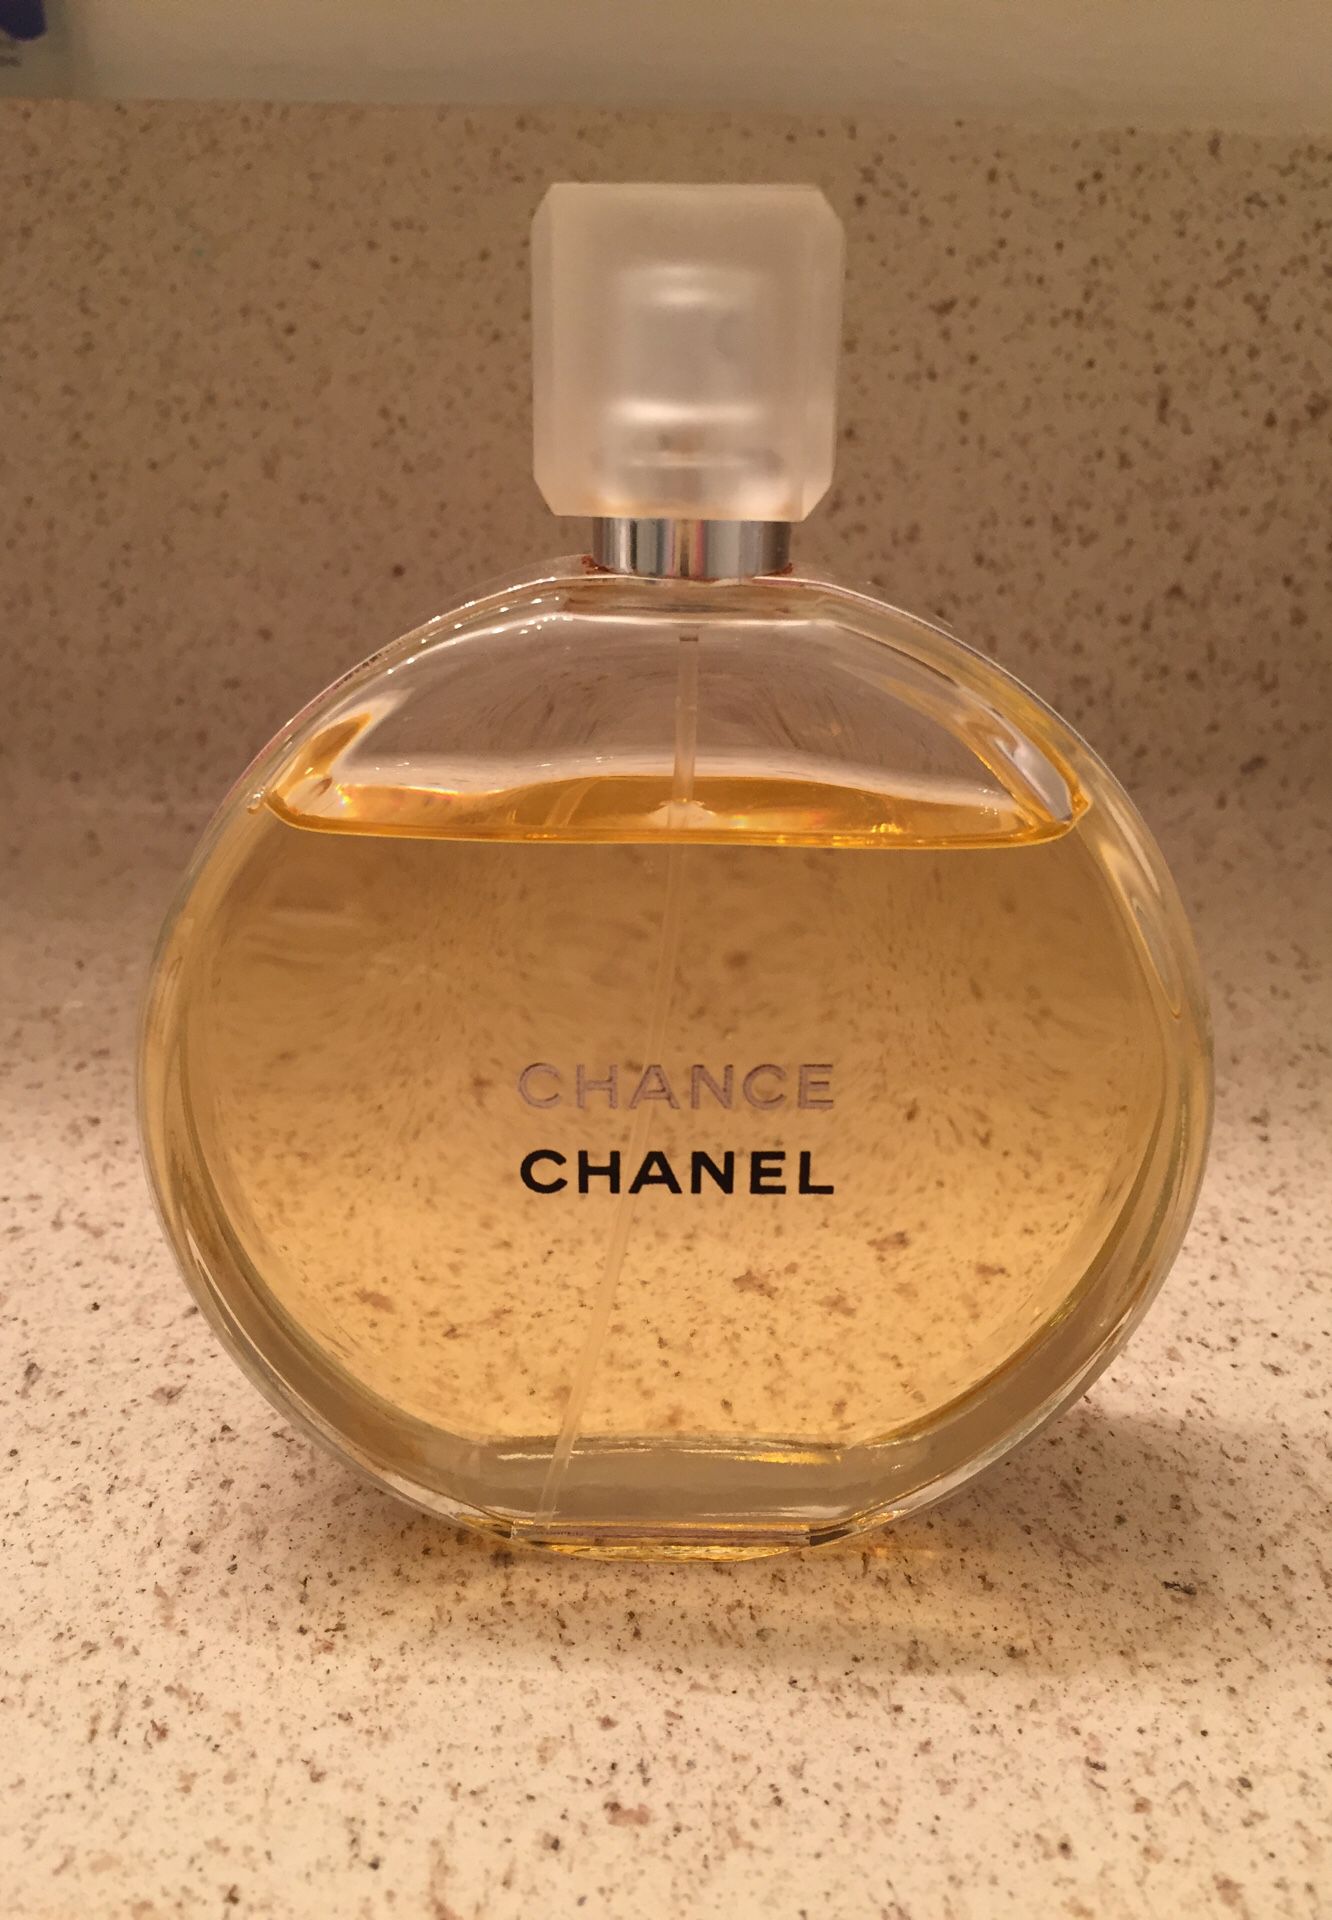 Chance Channel perfume 5fl oz selling price 45.00